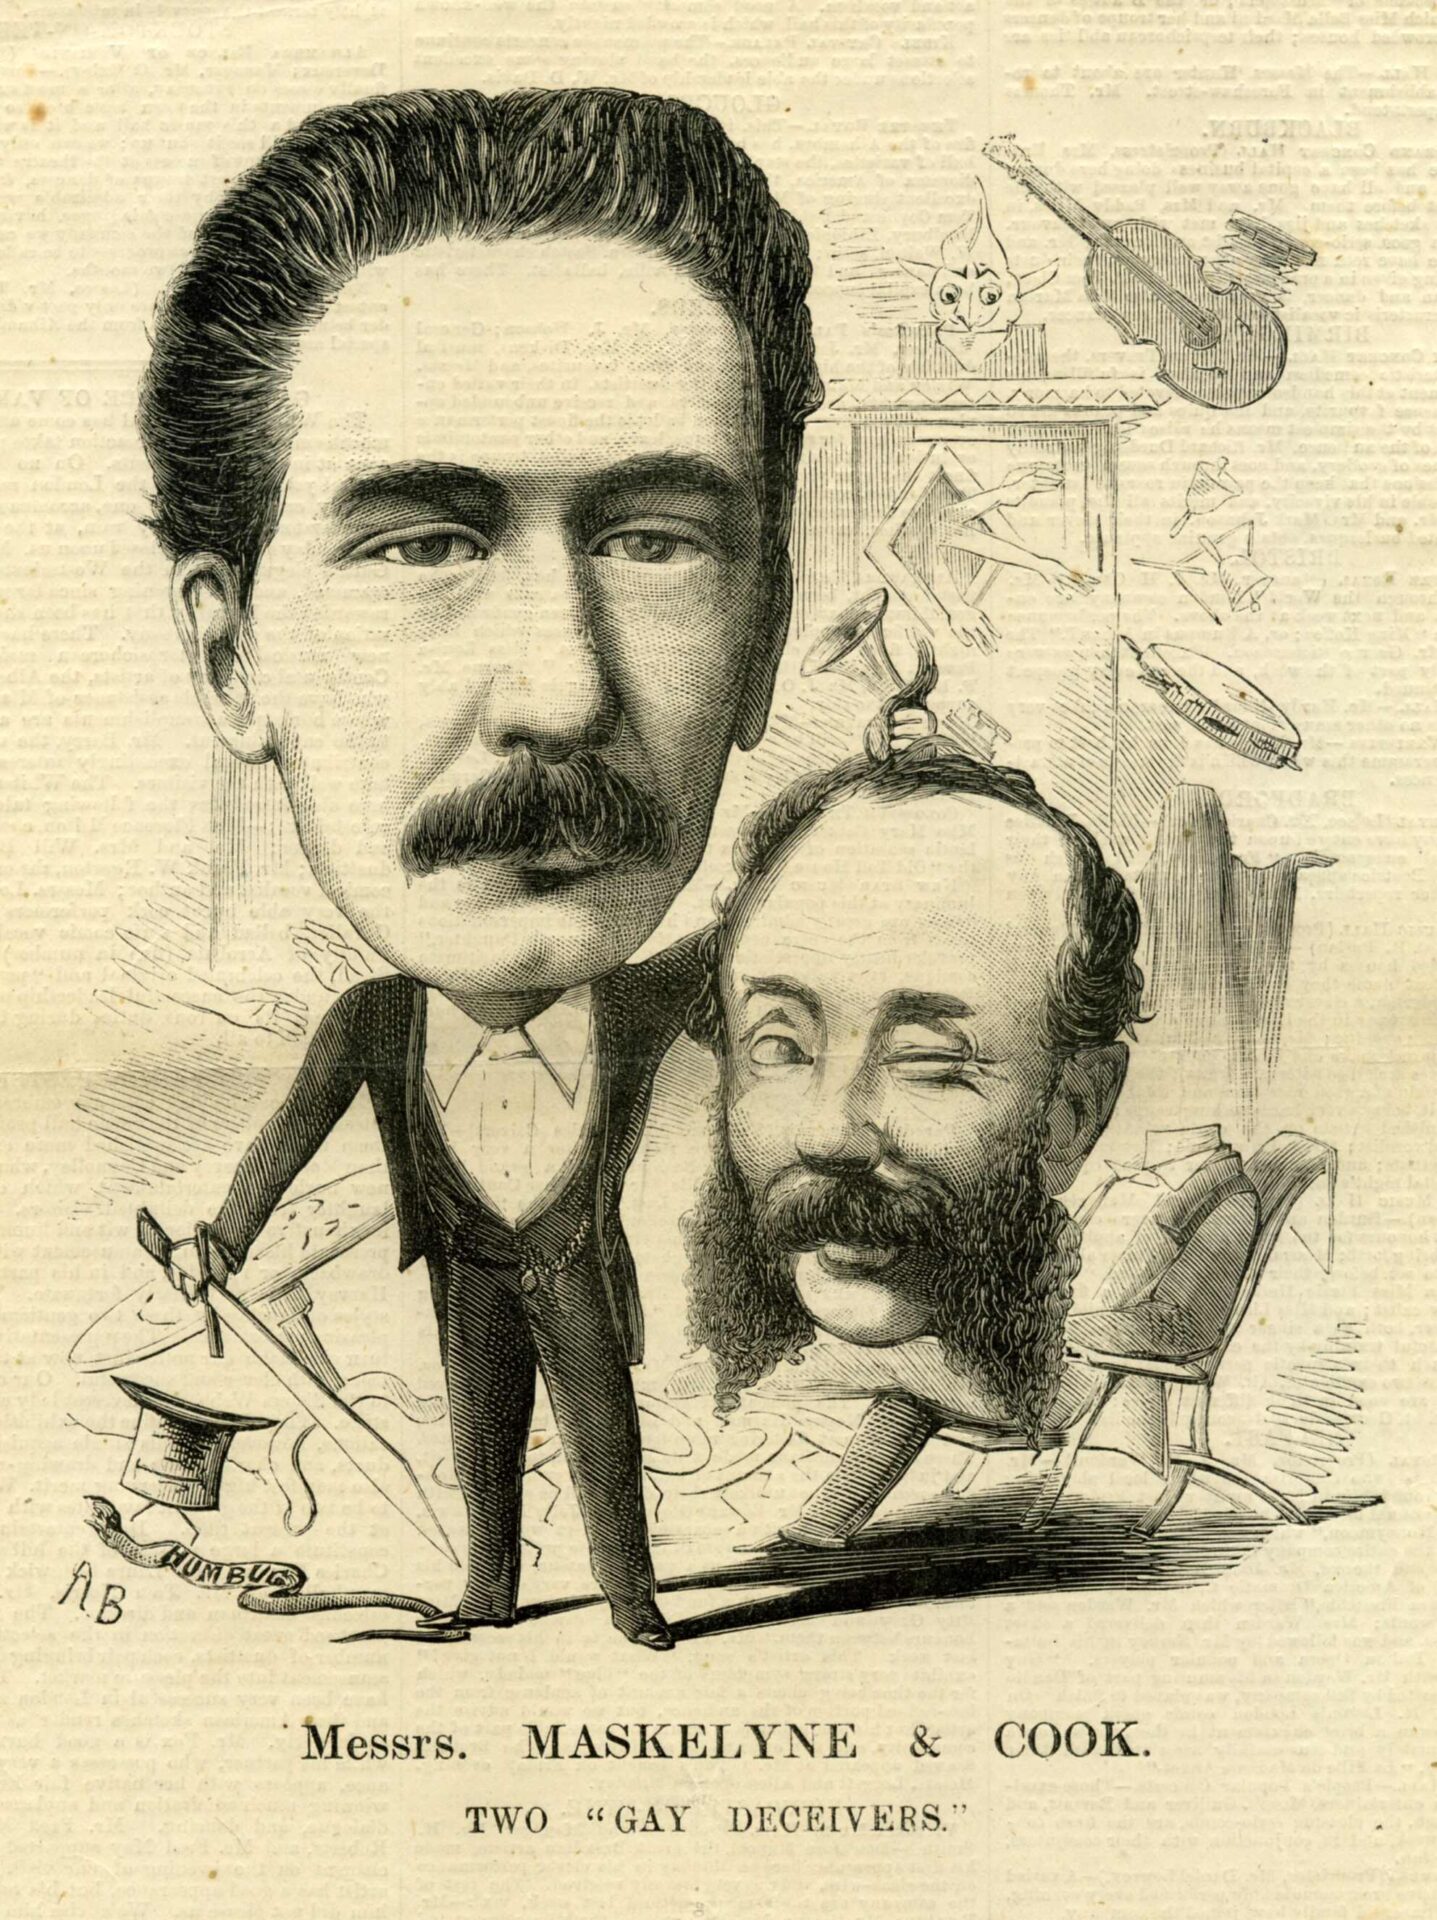 Maskelyne & Cooke: the early years